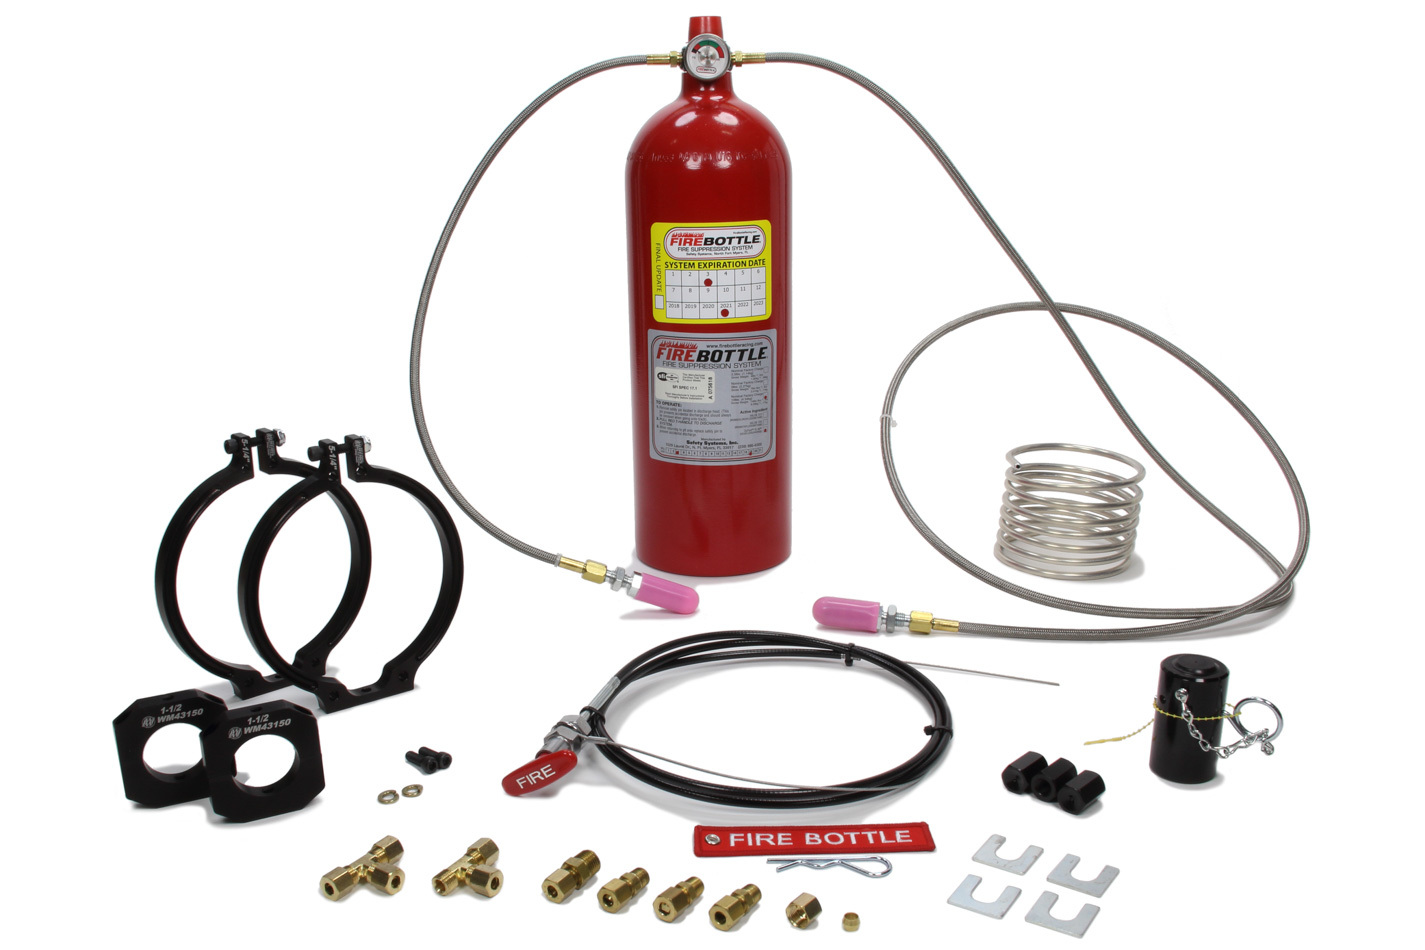 Safety Systems PAMRC-1002 Fire Suppression System, Automatic / Manual, FE-36, SFI Rated, 10.0 lb Bottle, Fittings / Hose / Manual Head / Mount / Pull Cable, Kit